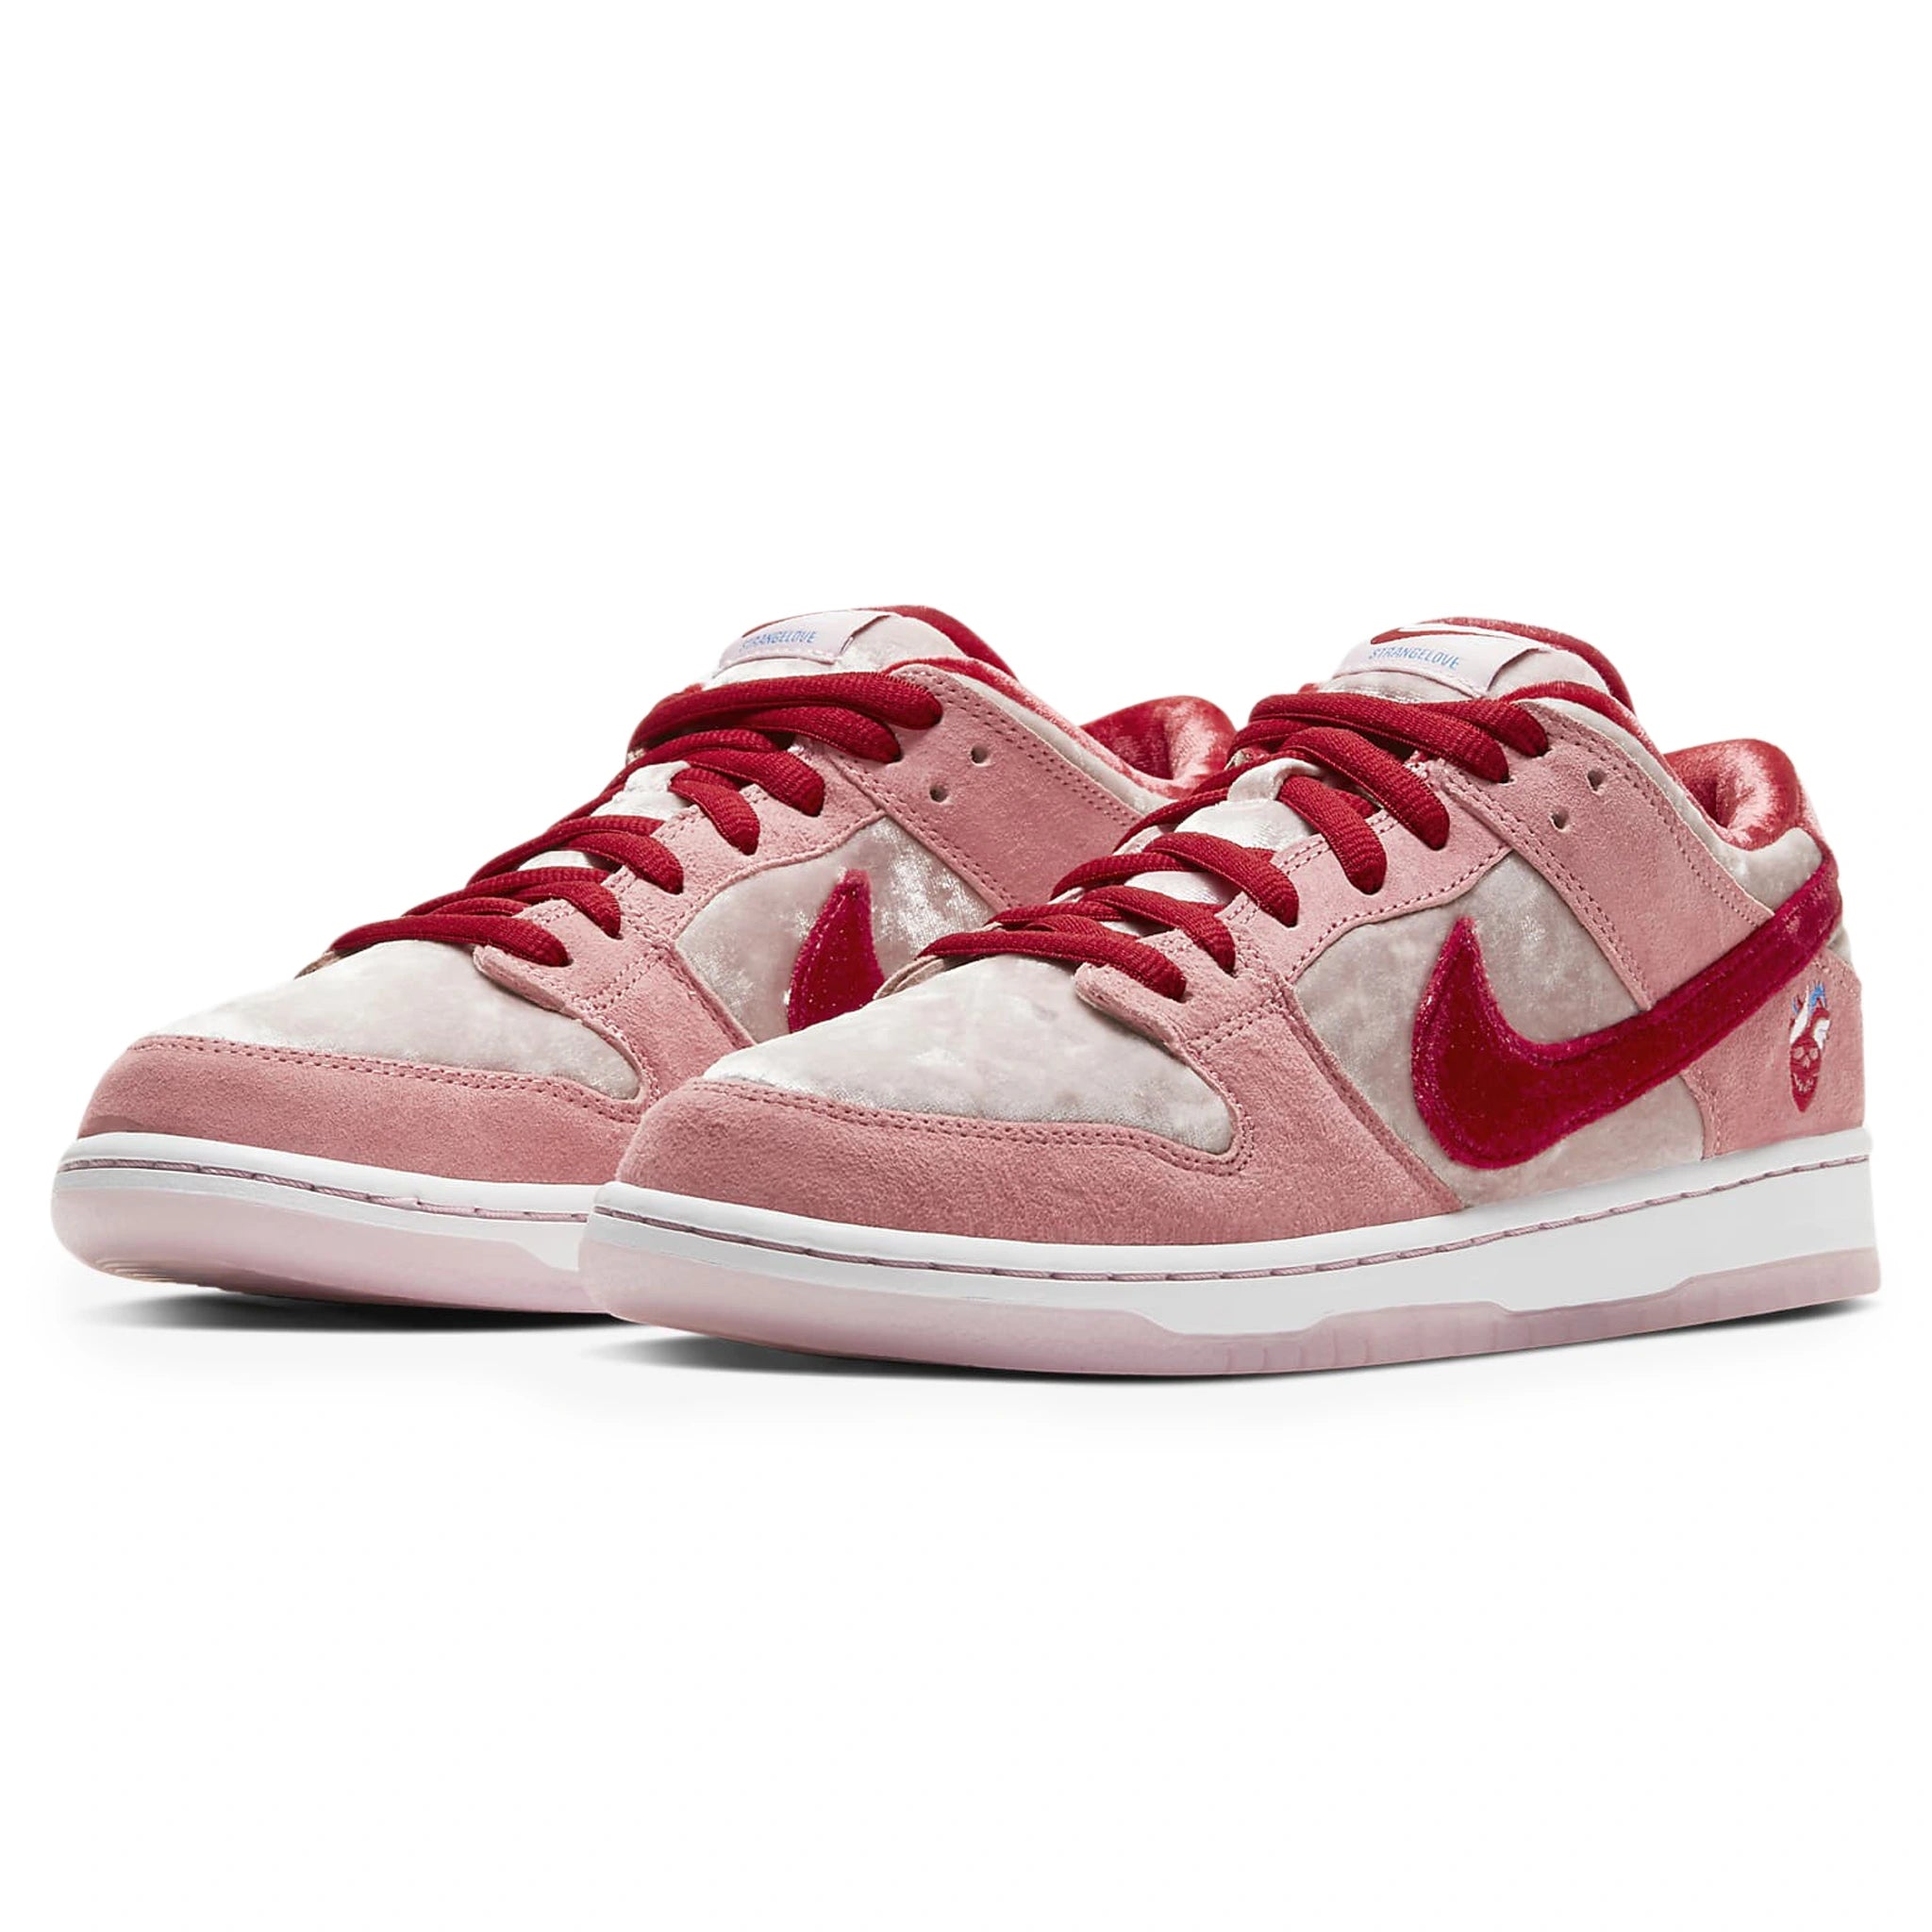 Front side view of StrangeLove X Nike SB Dunk Low Valentine's Day CT2552-800